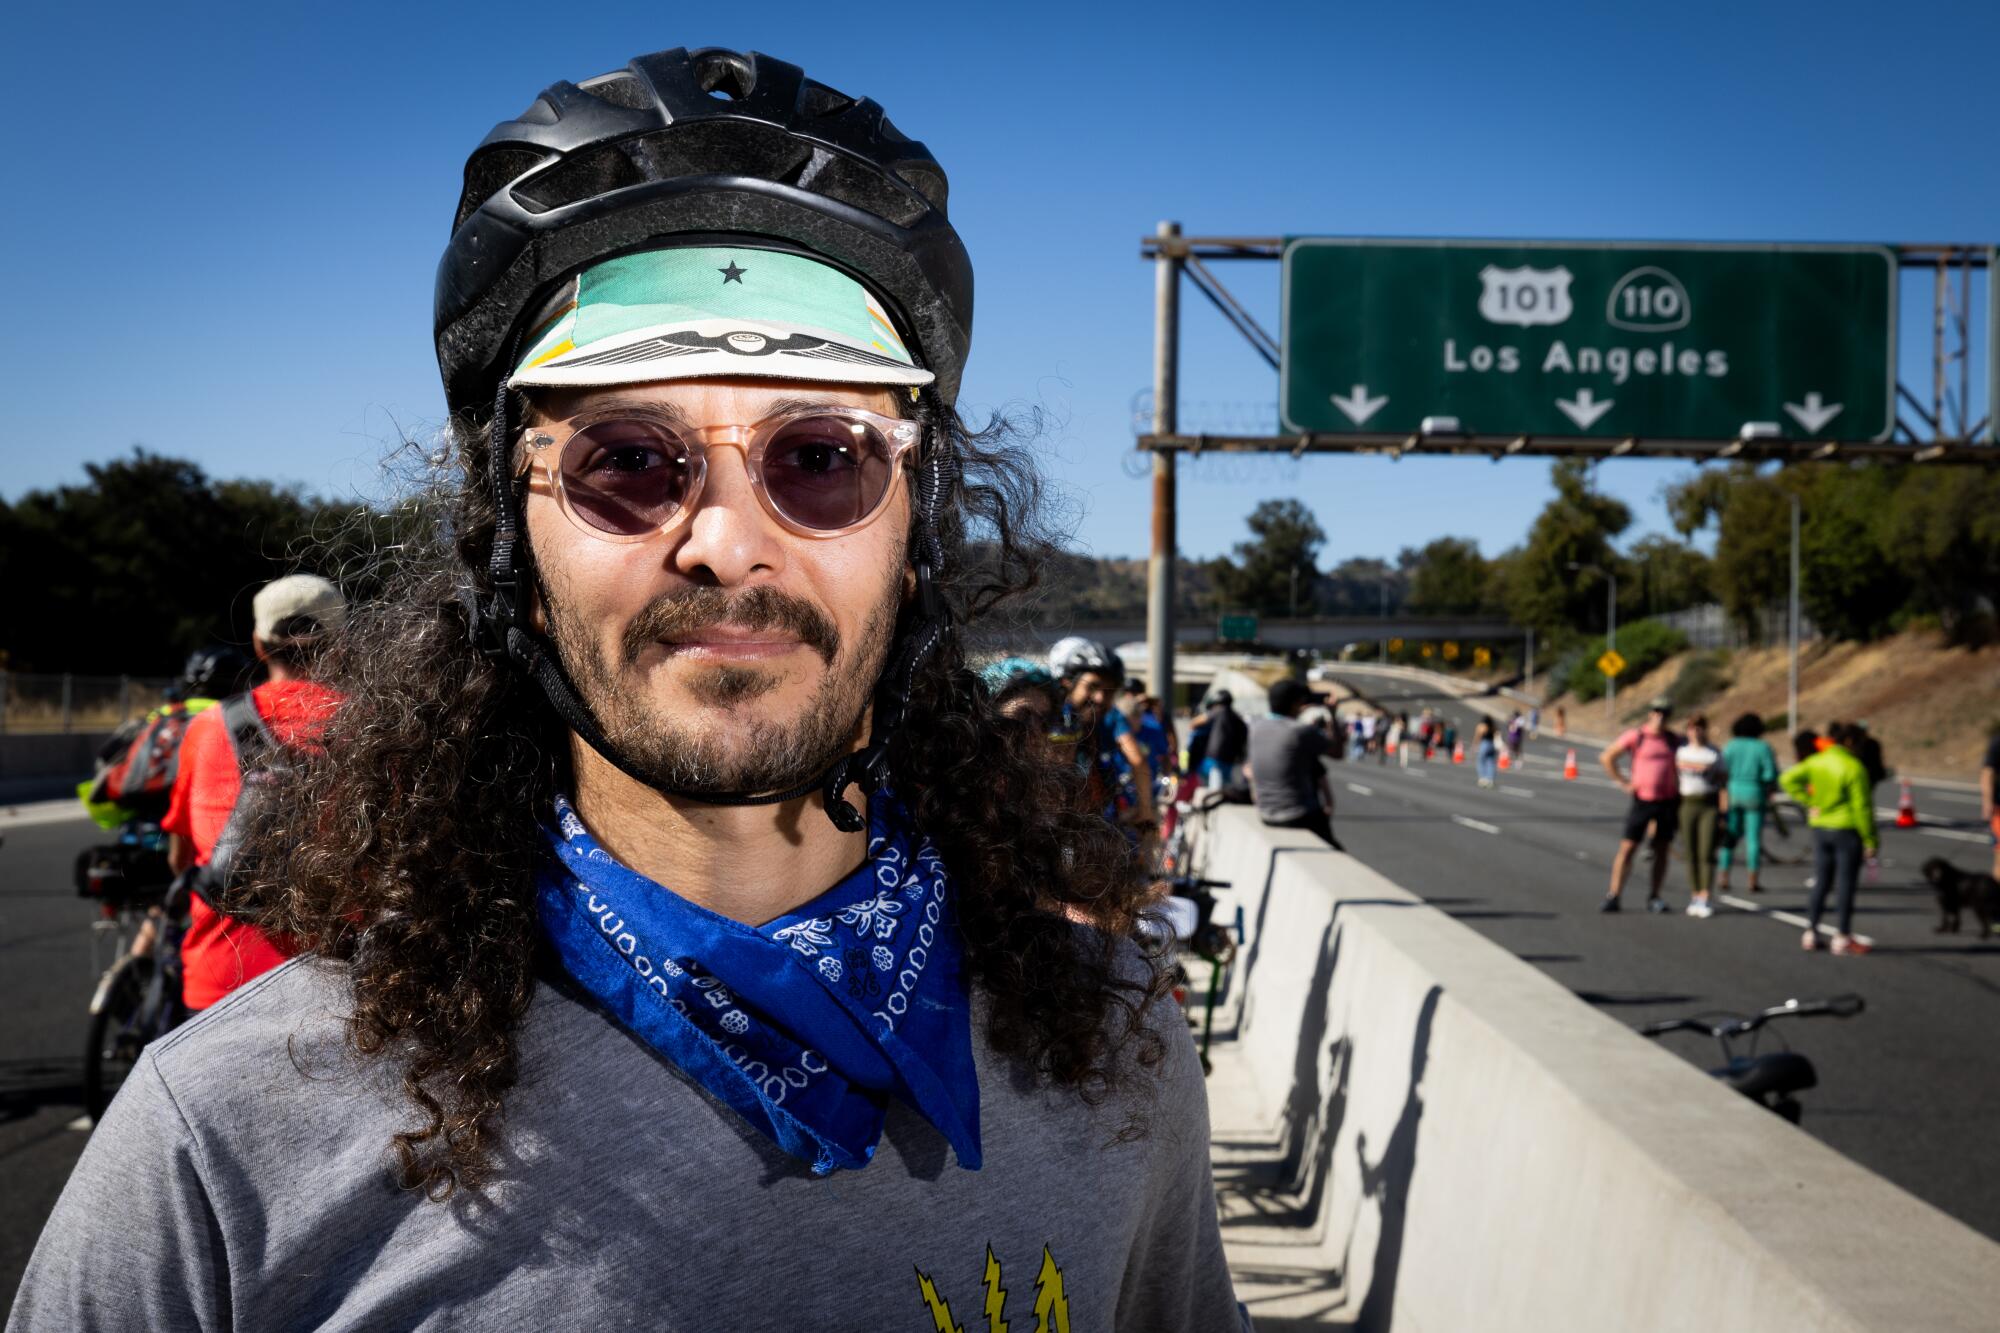 Lawrence Sanchez, of Highland Park, takes a break in the middle of the 110 Freeway.